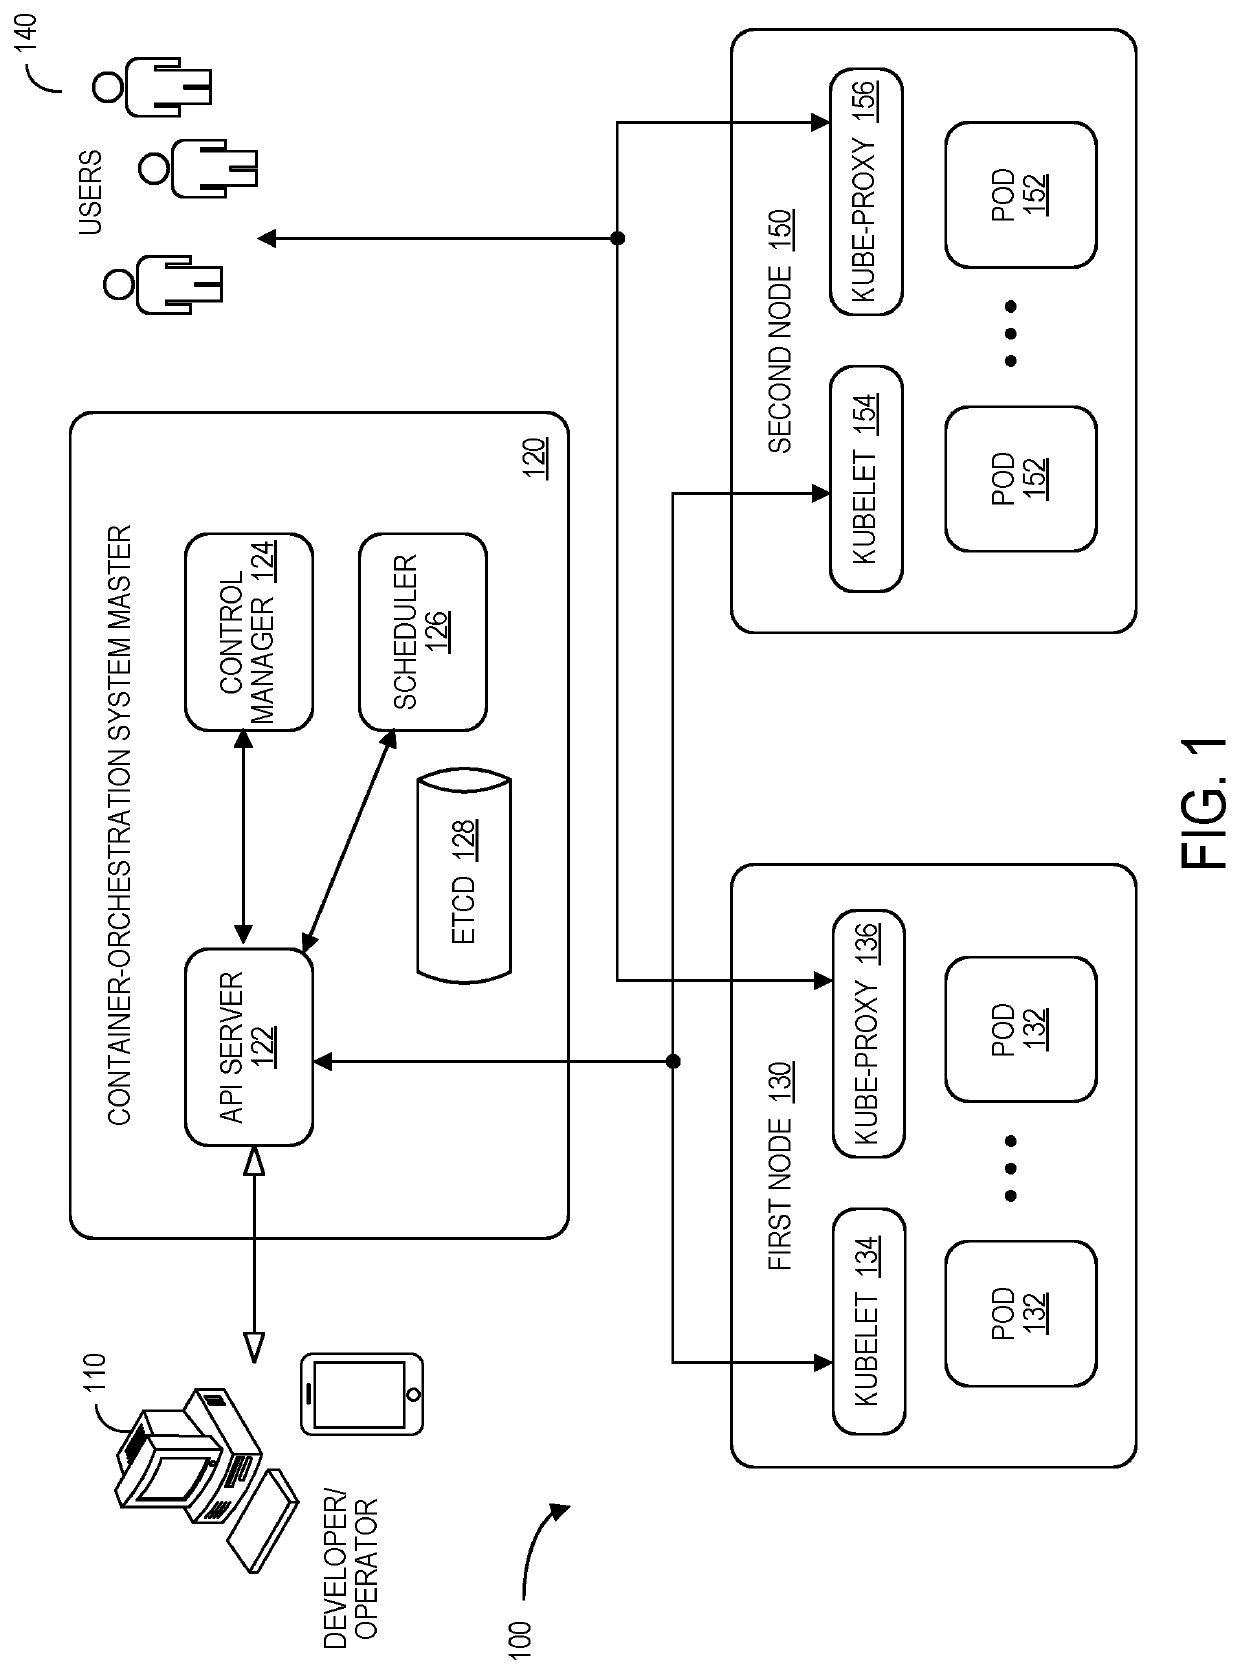 Configuration of decoupled upgrades for container-orchestration system-based services